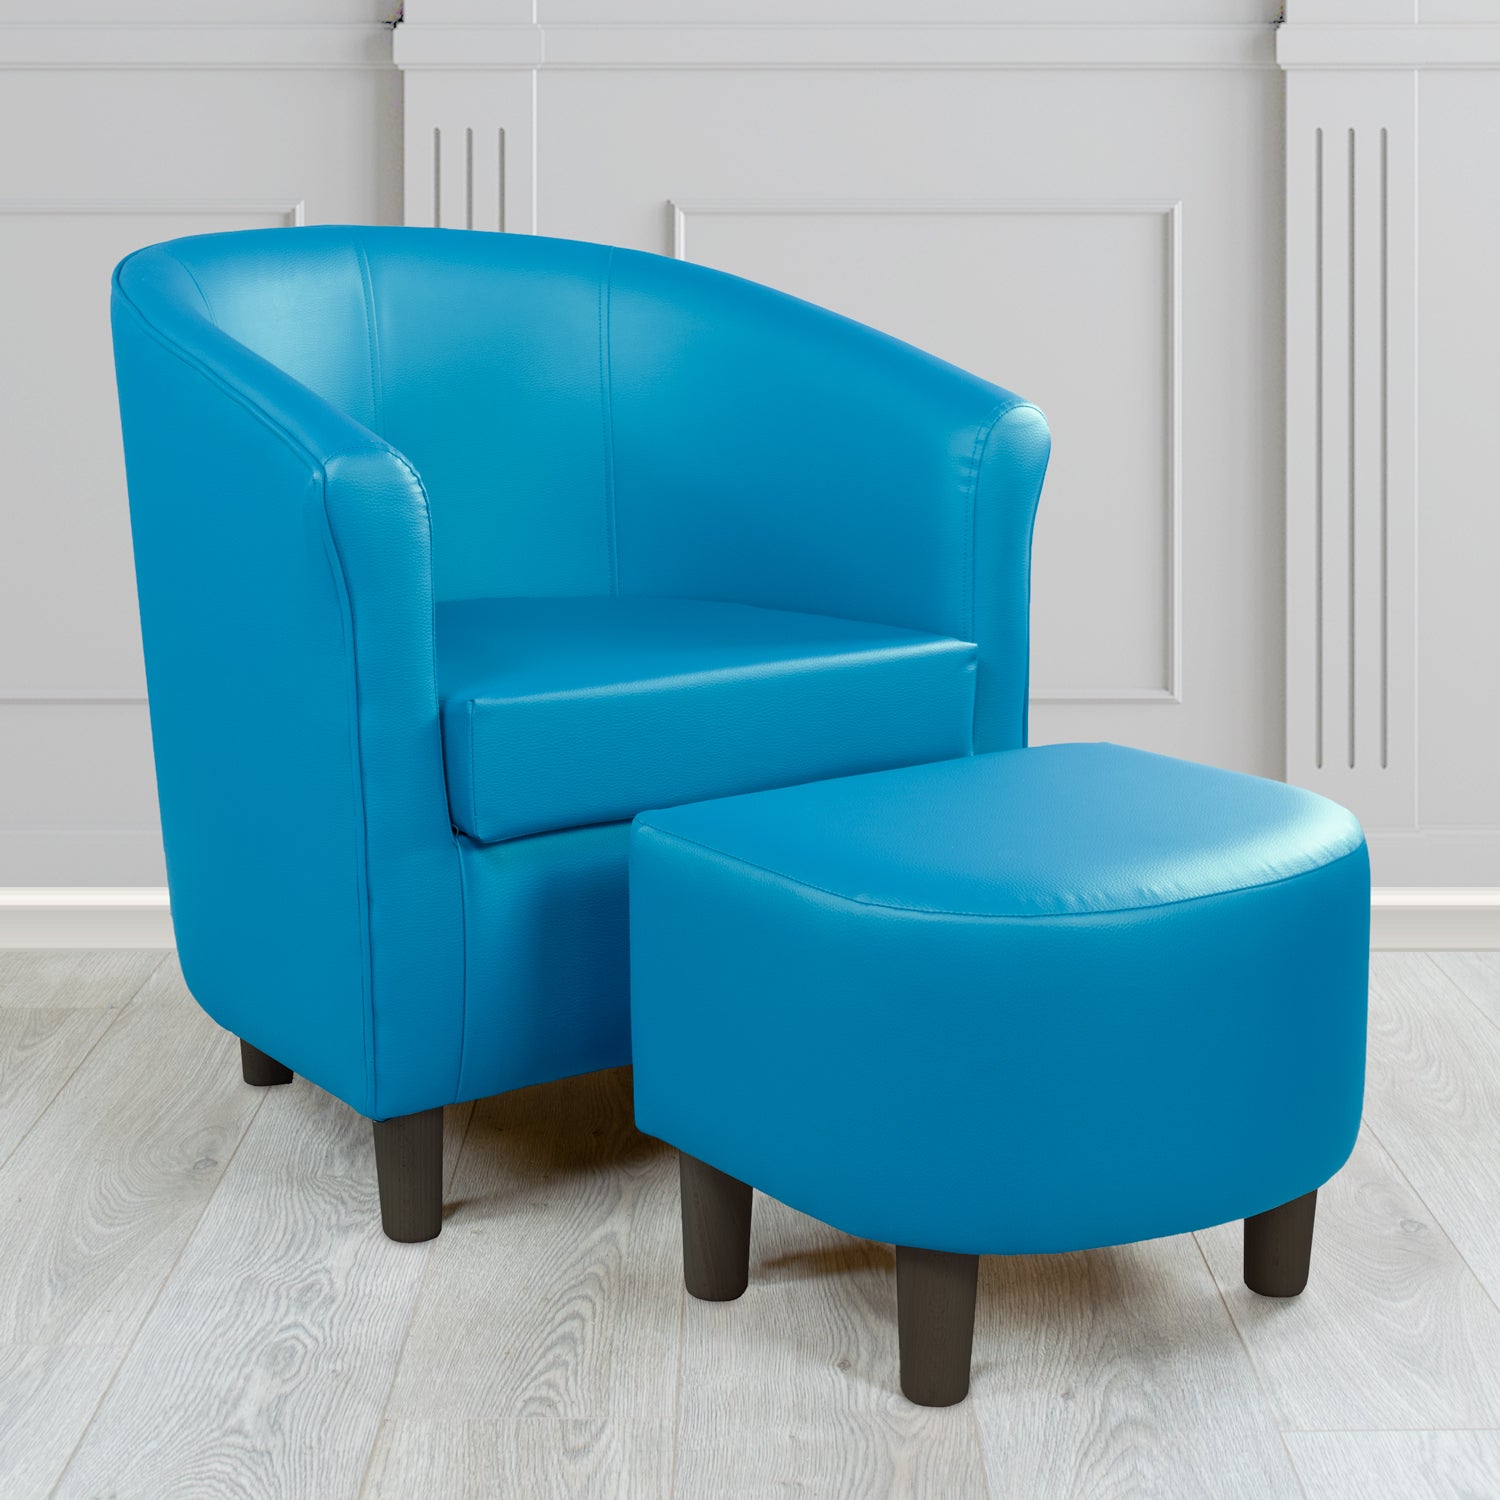 Express Tuscany Electric Blue DN Faux Leather Tub Chair with Footstool Set (6541298073642)